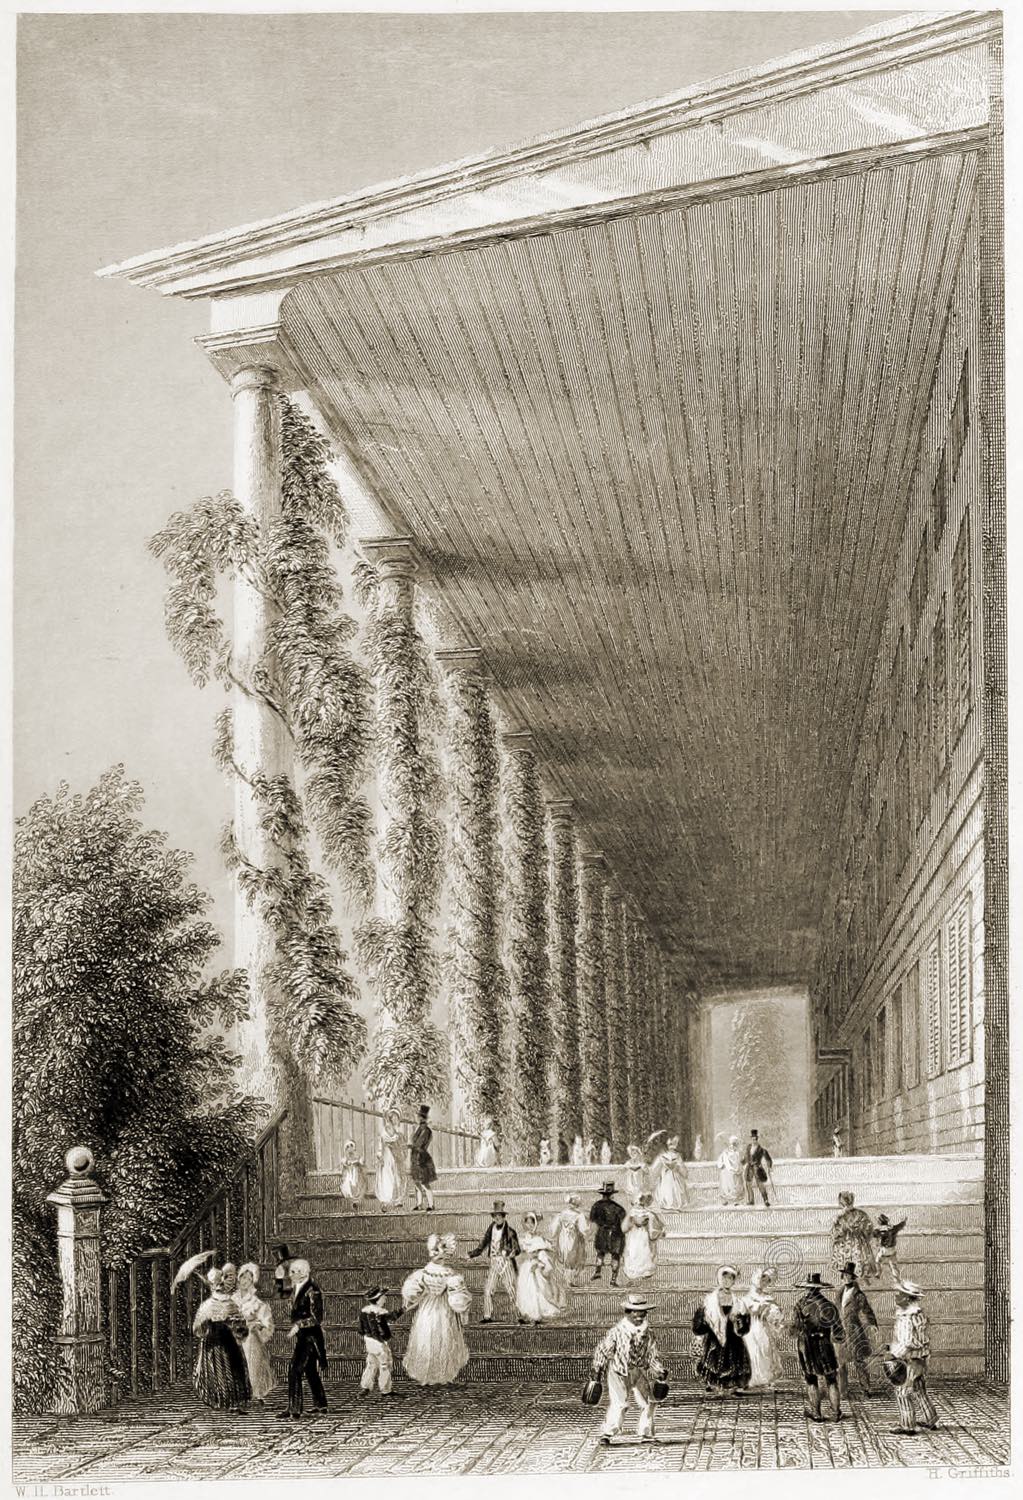 The Colonnade of Congress Hall, Saratoga Springs.